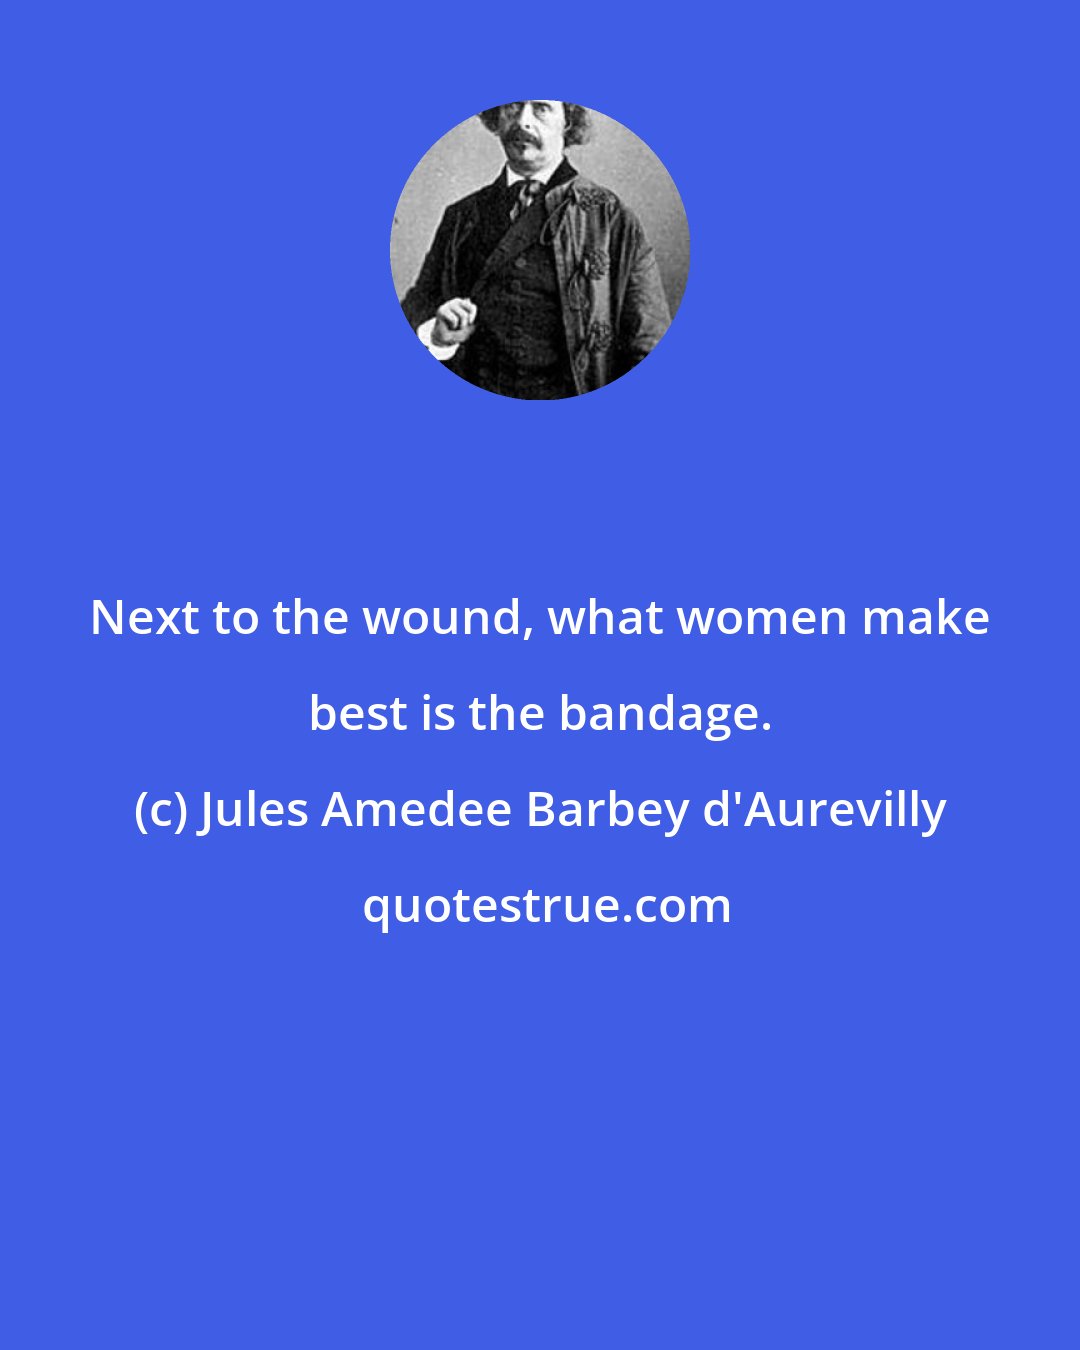 Jules Amedee Barbey d'Aurevilly: Next to the wound, what women make best is the bandage.